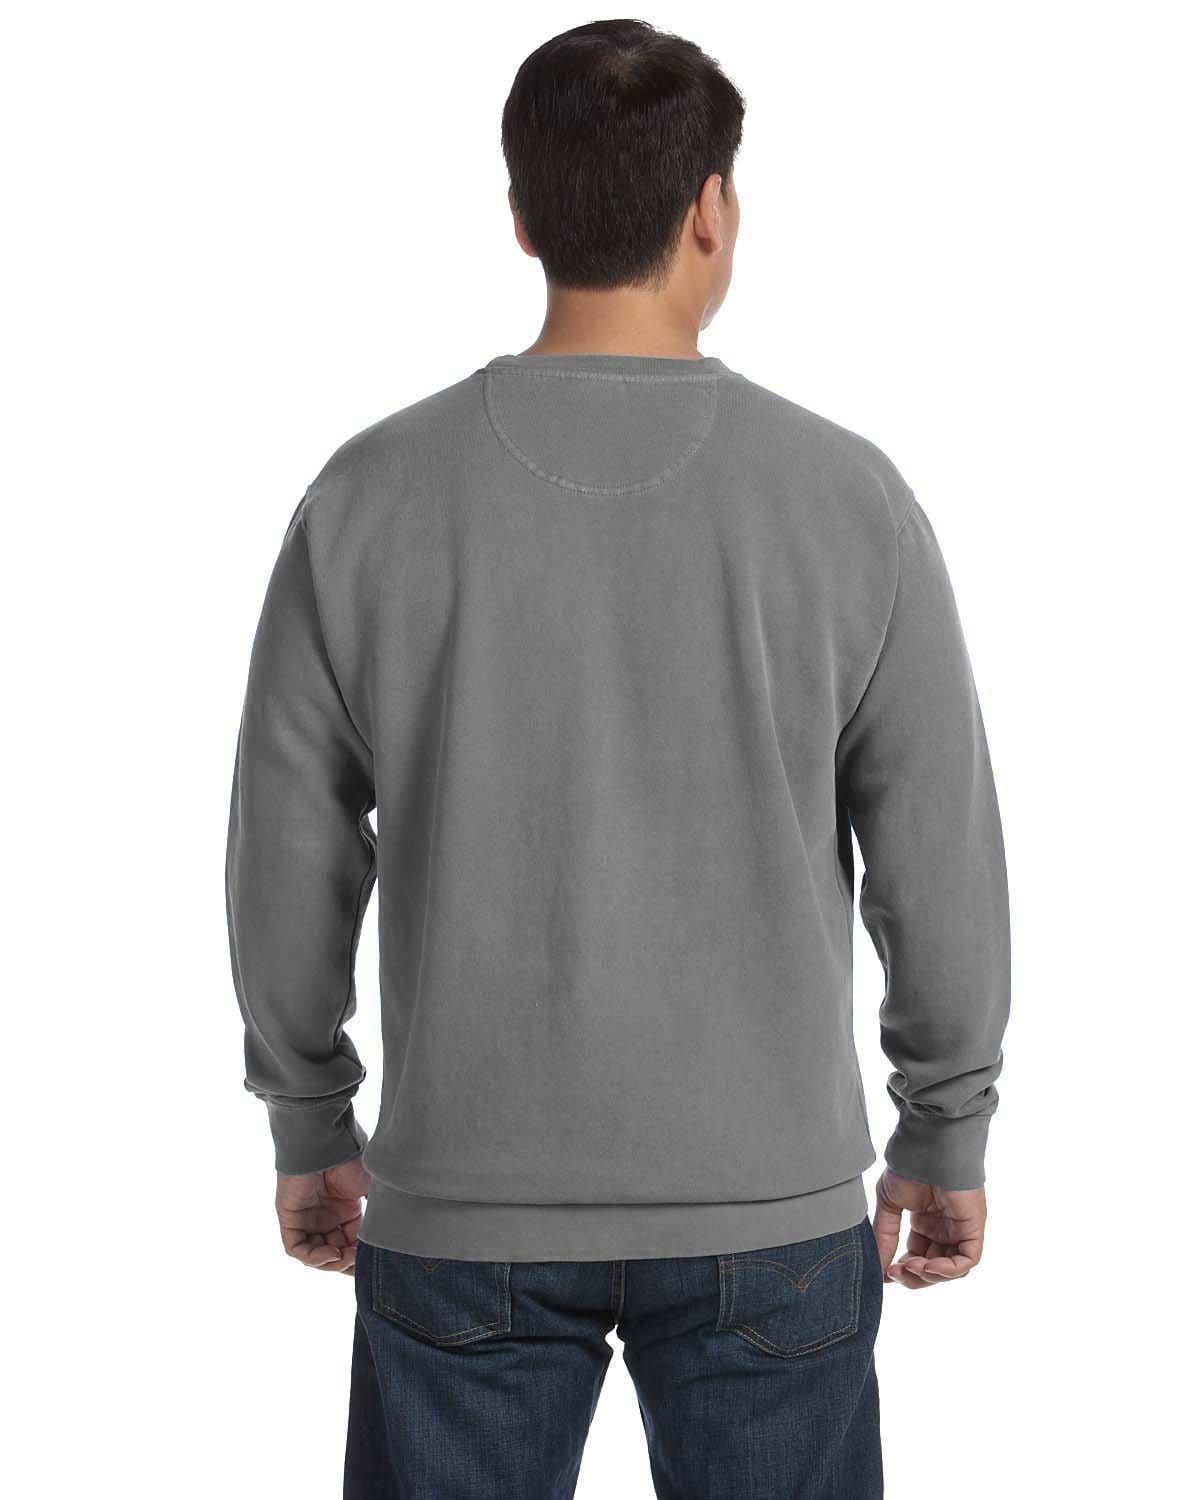 CLASSIC CREWNECK SWEATSHIRT [GARMENT DYED] [DISTRESSED CHARCOAL] – Consumer  Commodity